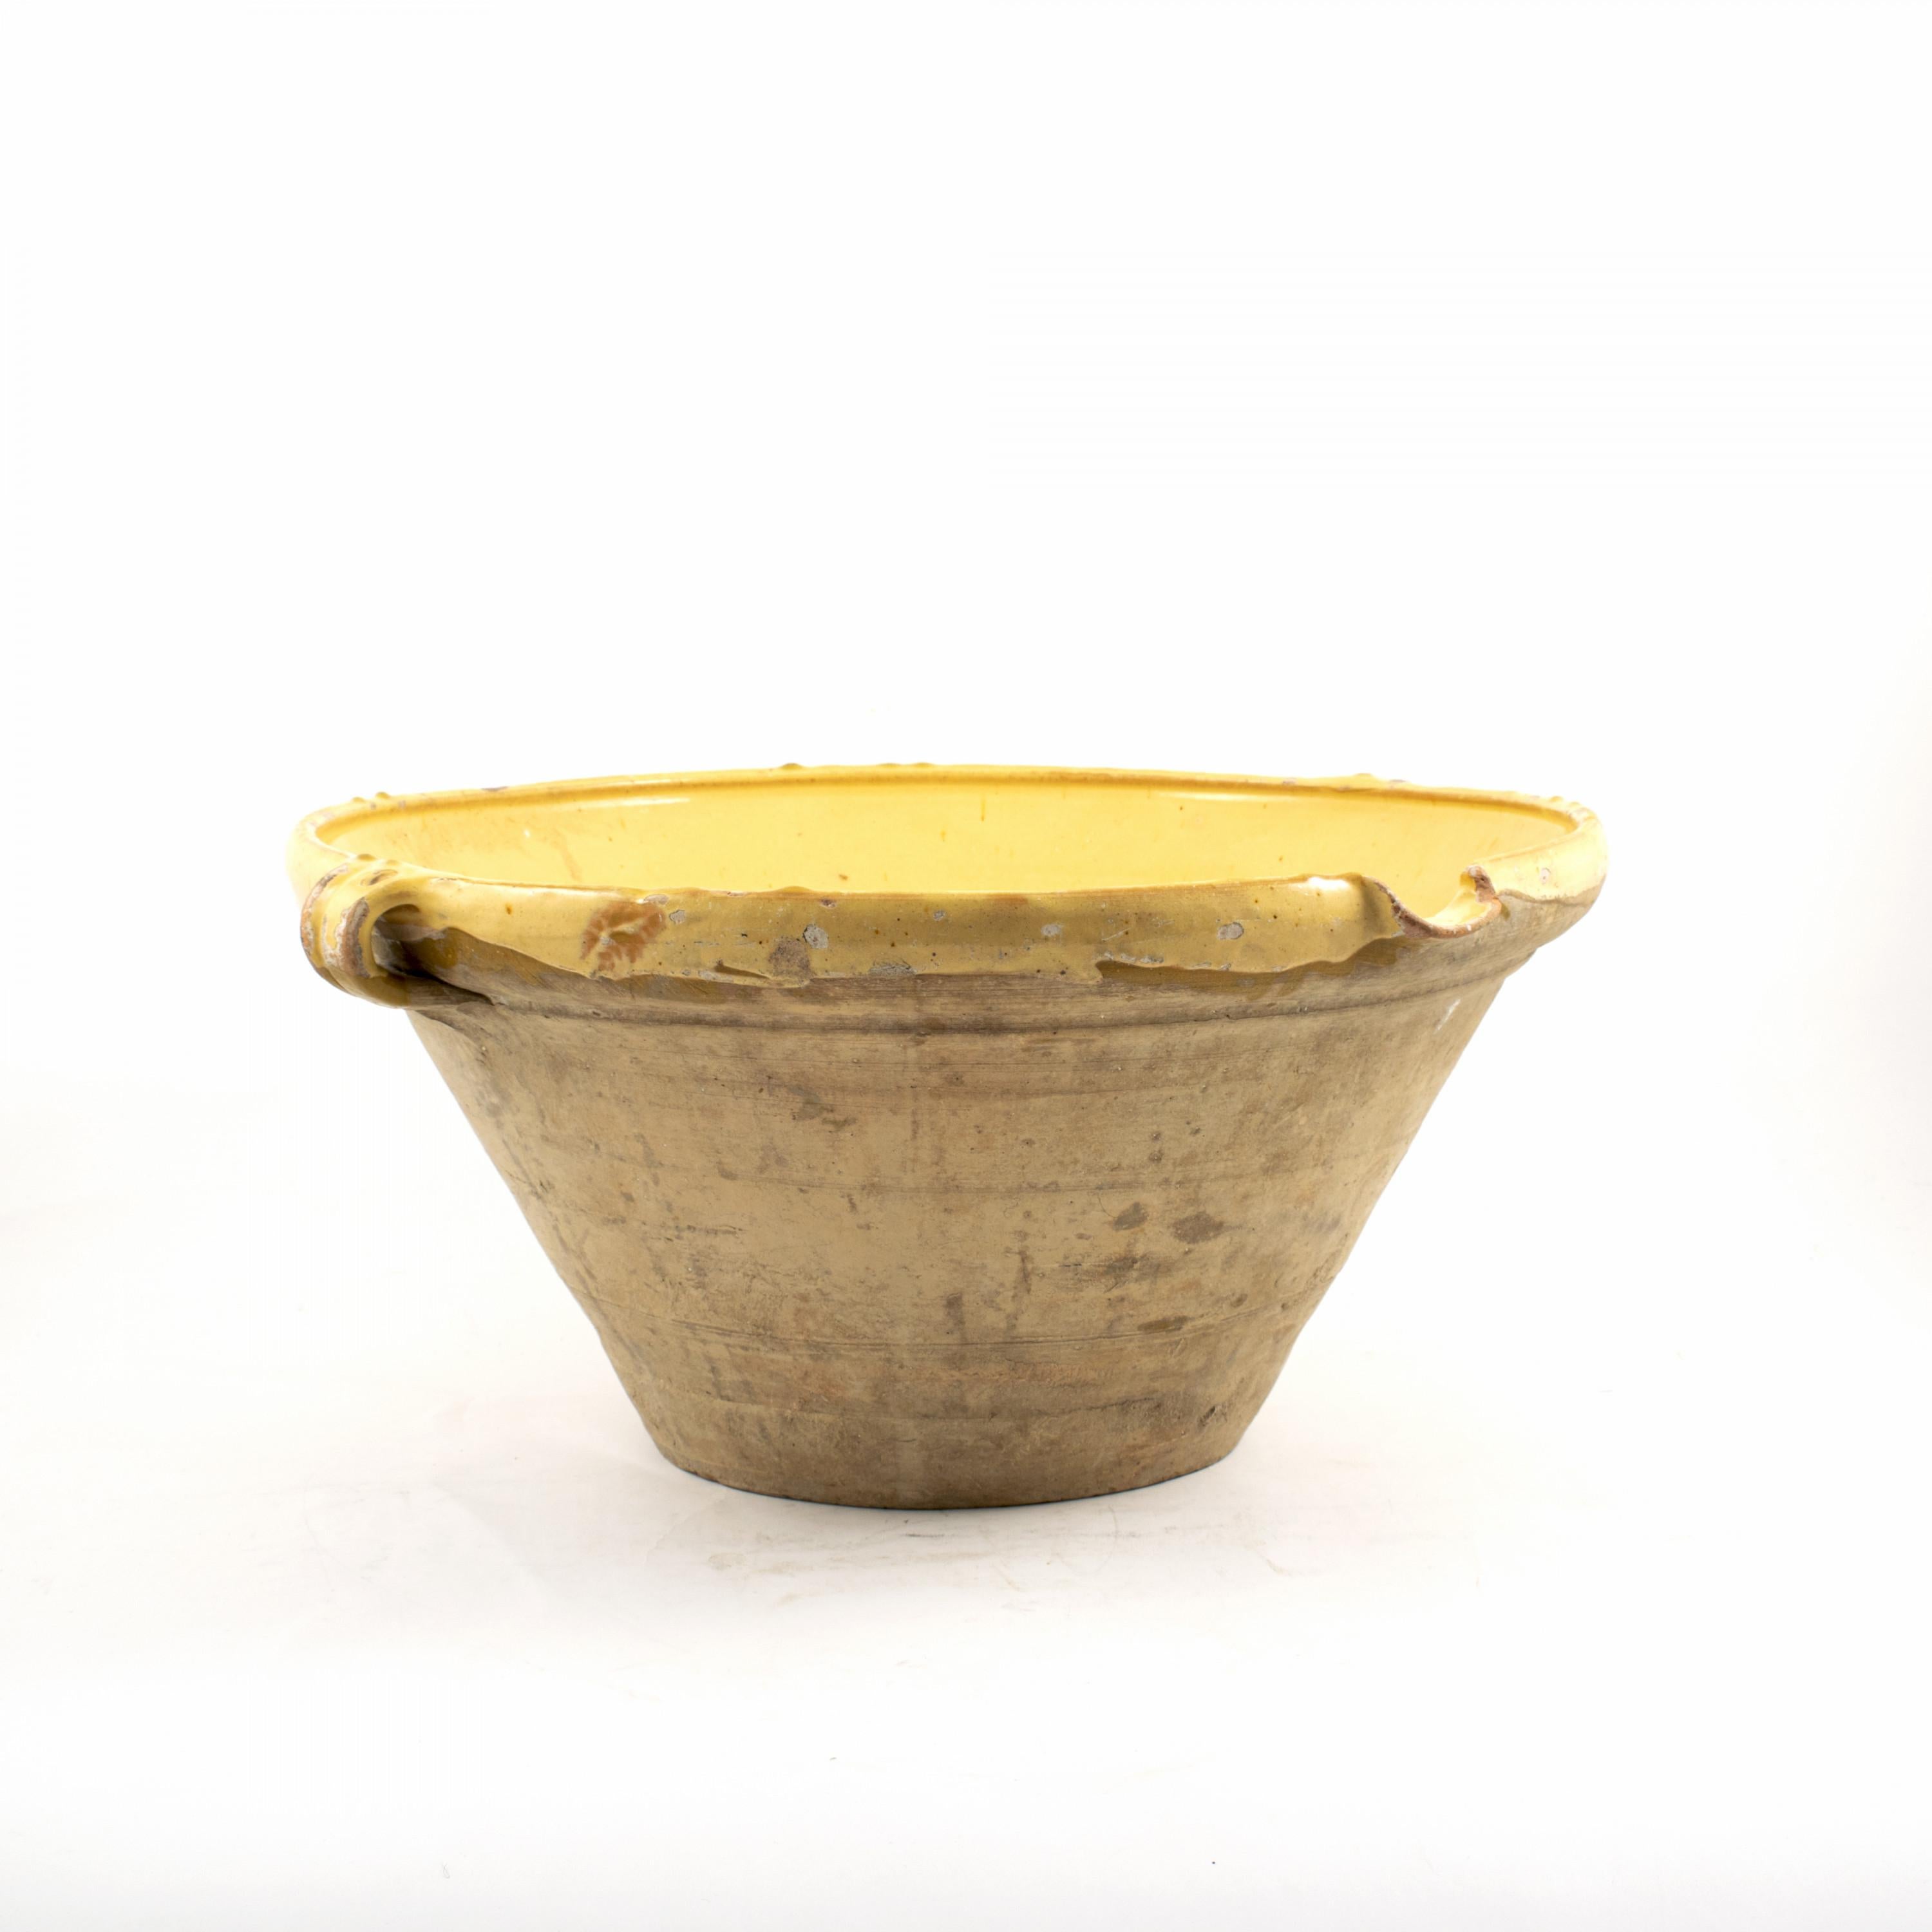 Terracotta Large French Bowl 'Tian' with Yellow Glaze, 19th Century